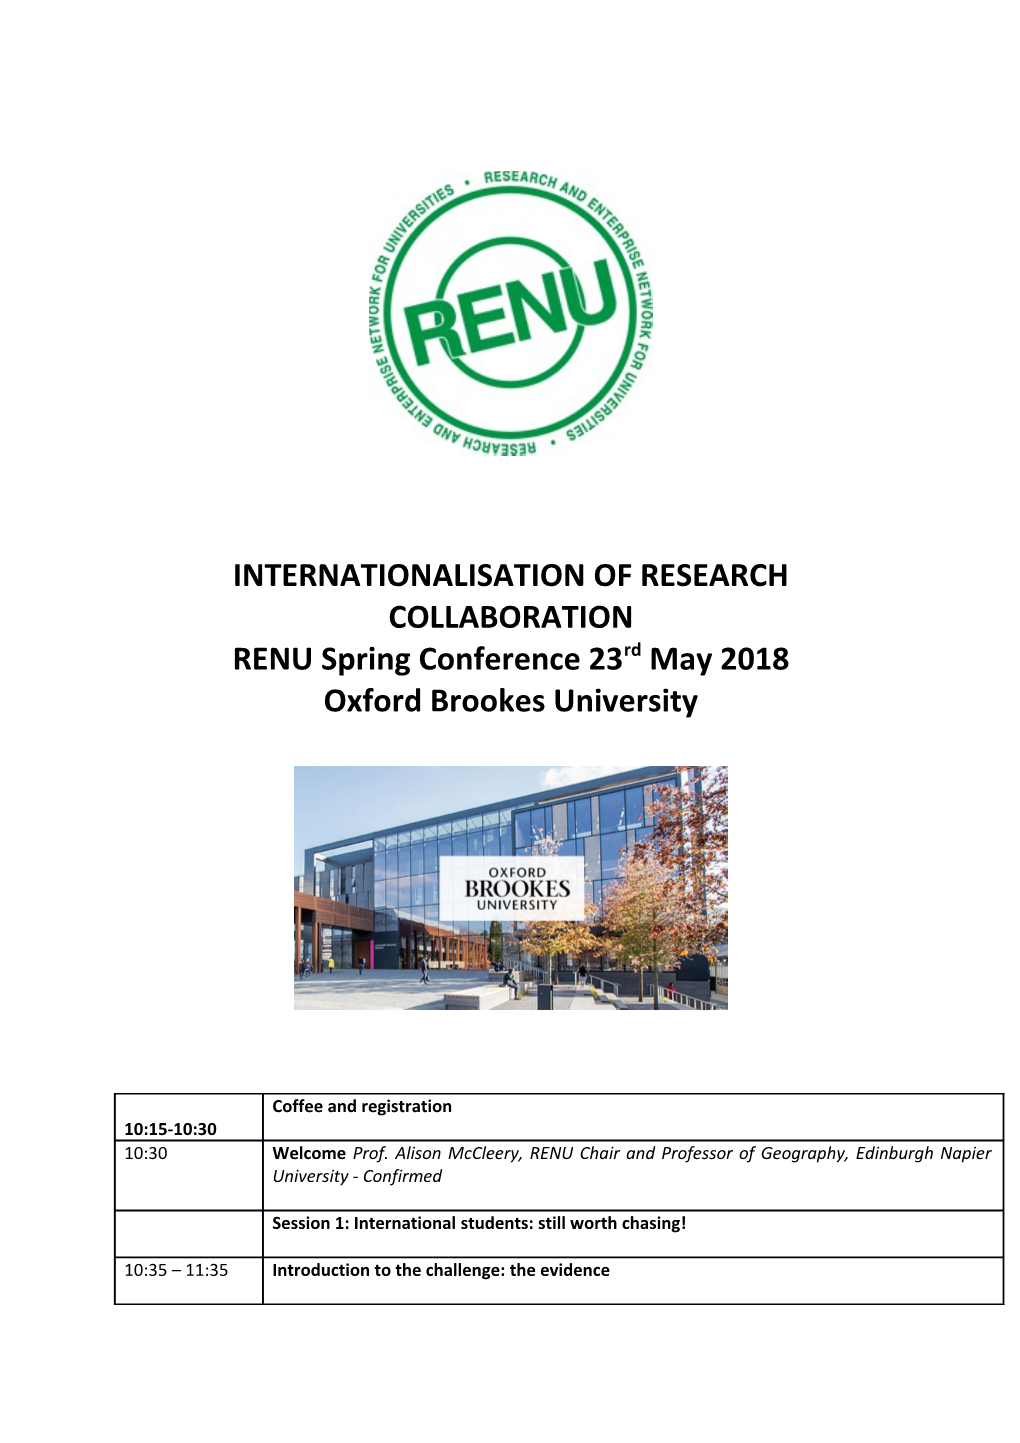 Internationalisation of Research Collaboration